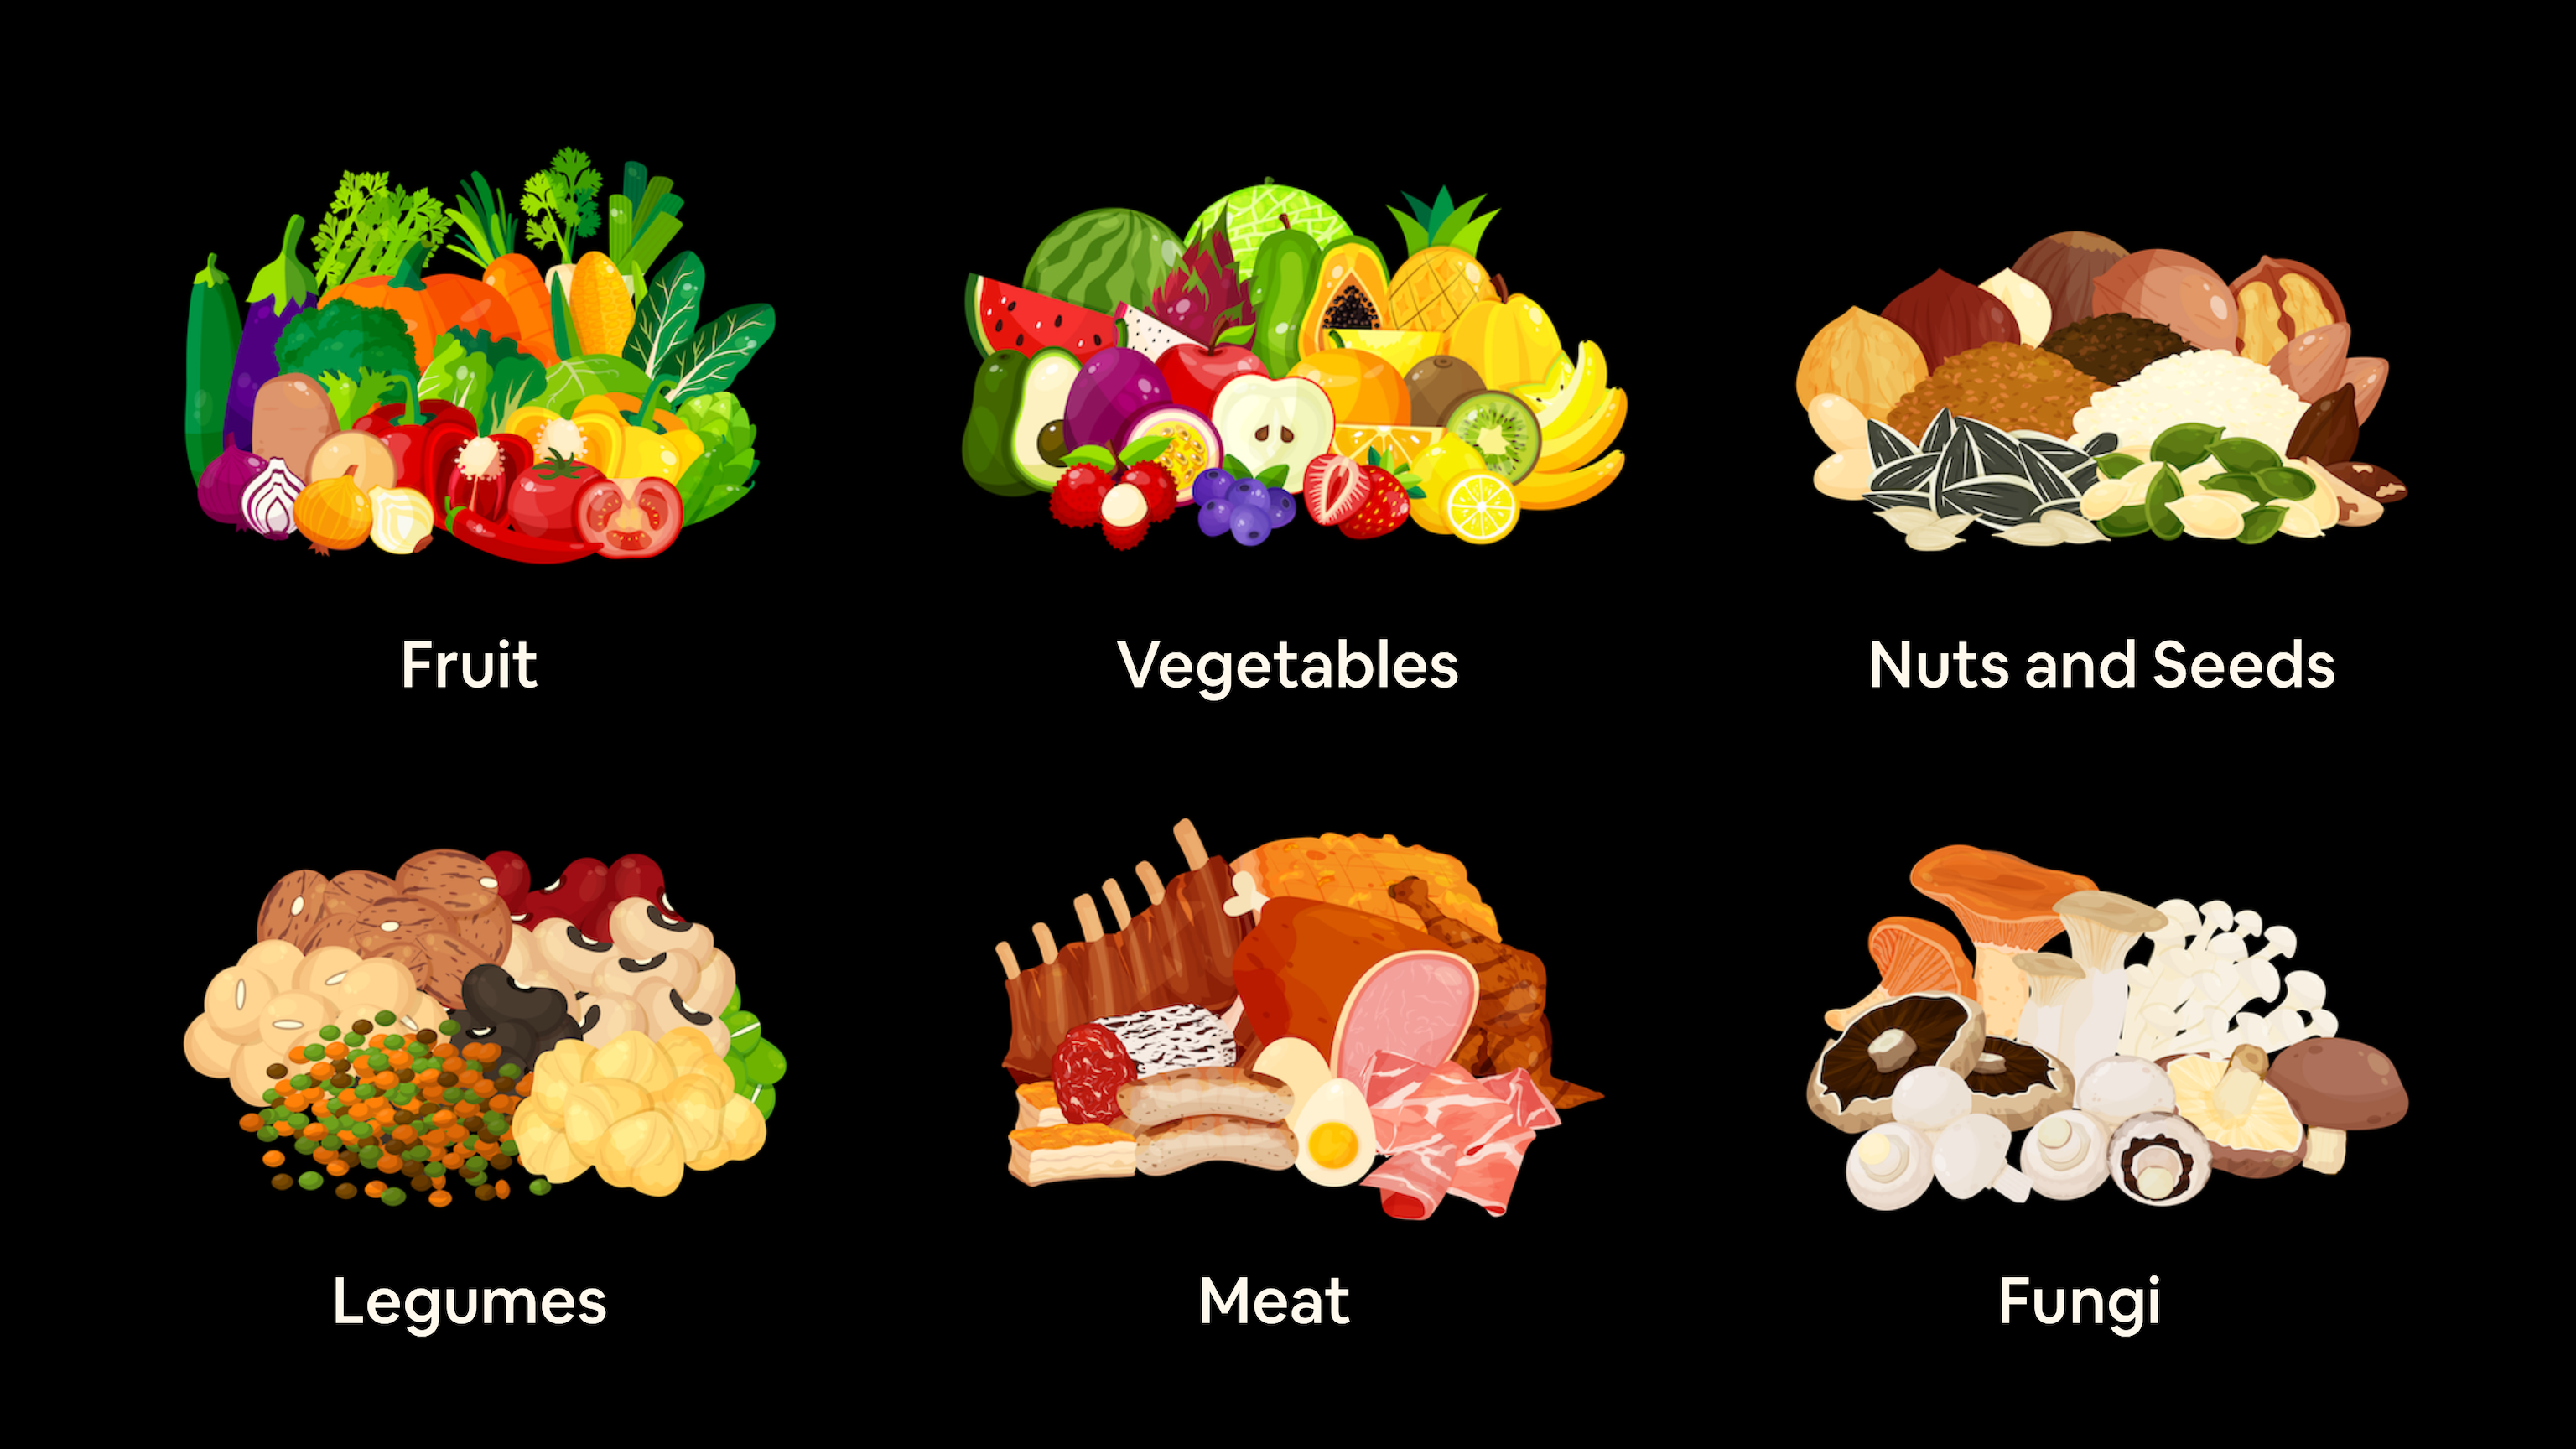 example of Nutrify food categories, fruits, vegetables, legumes, nuts and seeds, fungi and meat. These are six out of the 22 categories Nutrify covers